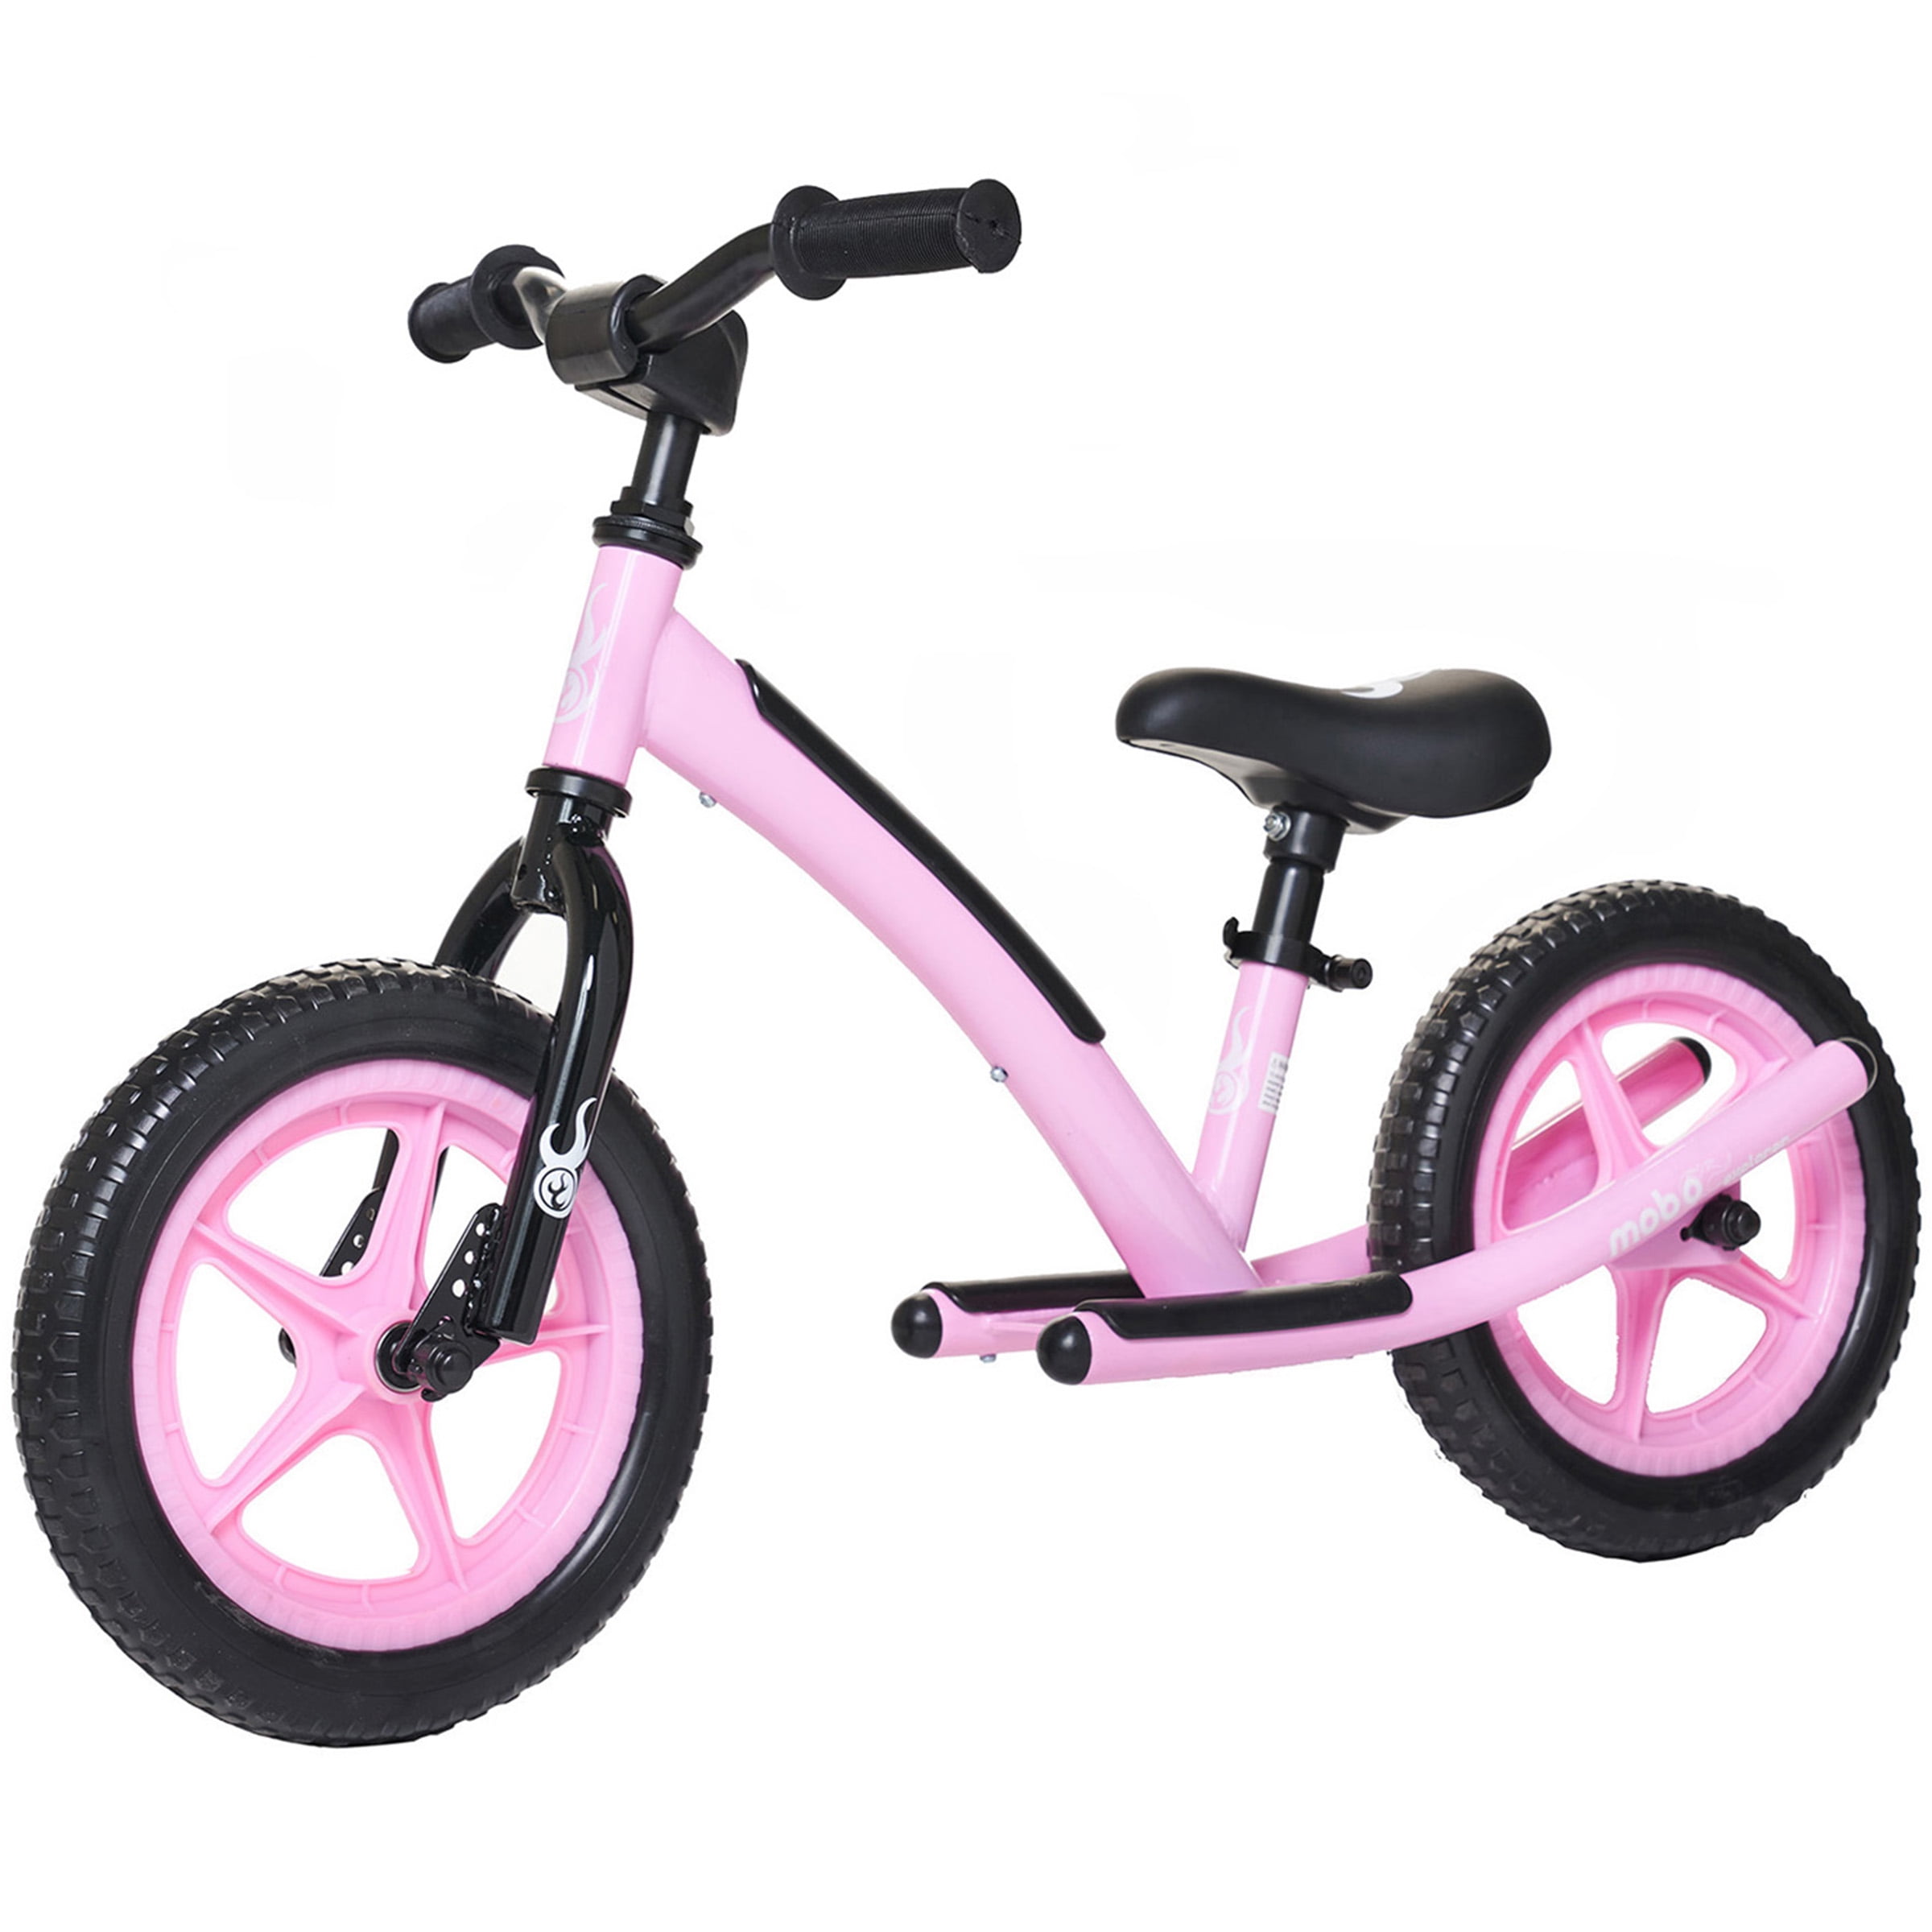 12 Inch Wheels No Pedal Bike Best Gift for Girls Boys Ages 2 Years to 6 Years Toddler Training Bike with Bluetooth Music & LED Adjustable Handlebar & Seat AODI Balance Bike for Kids 